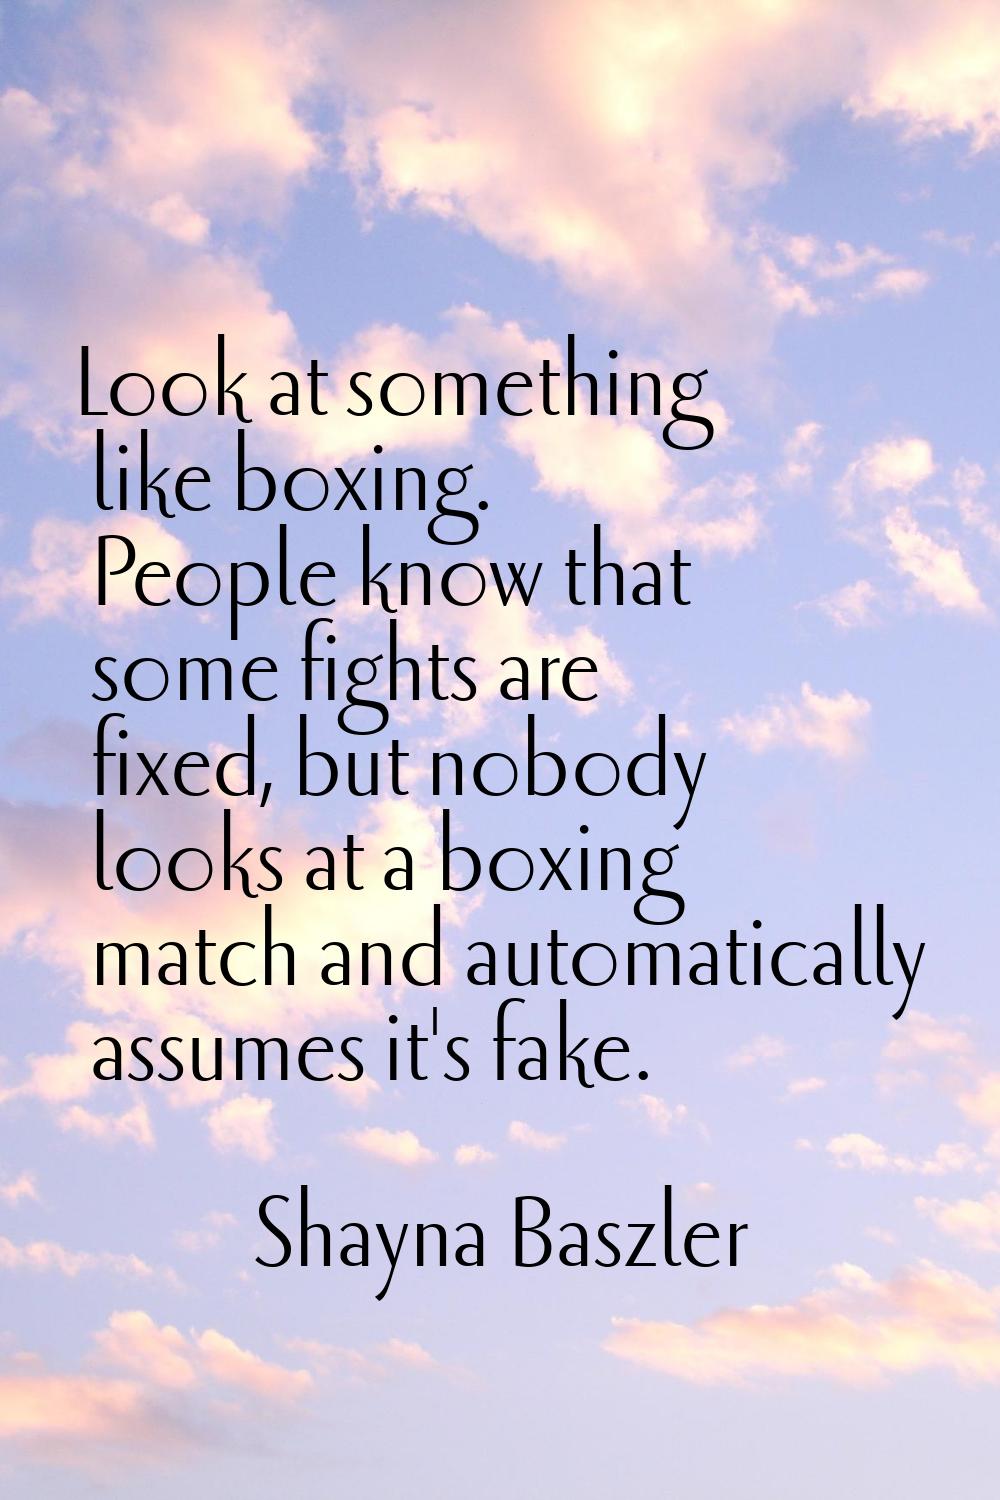 Look at something like boxing. People know that some fights are fixed, but nobody looks at a boxing